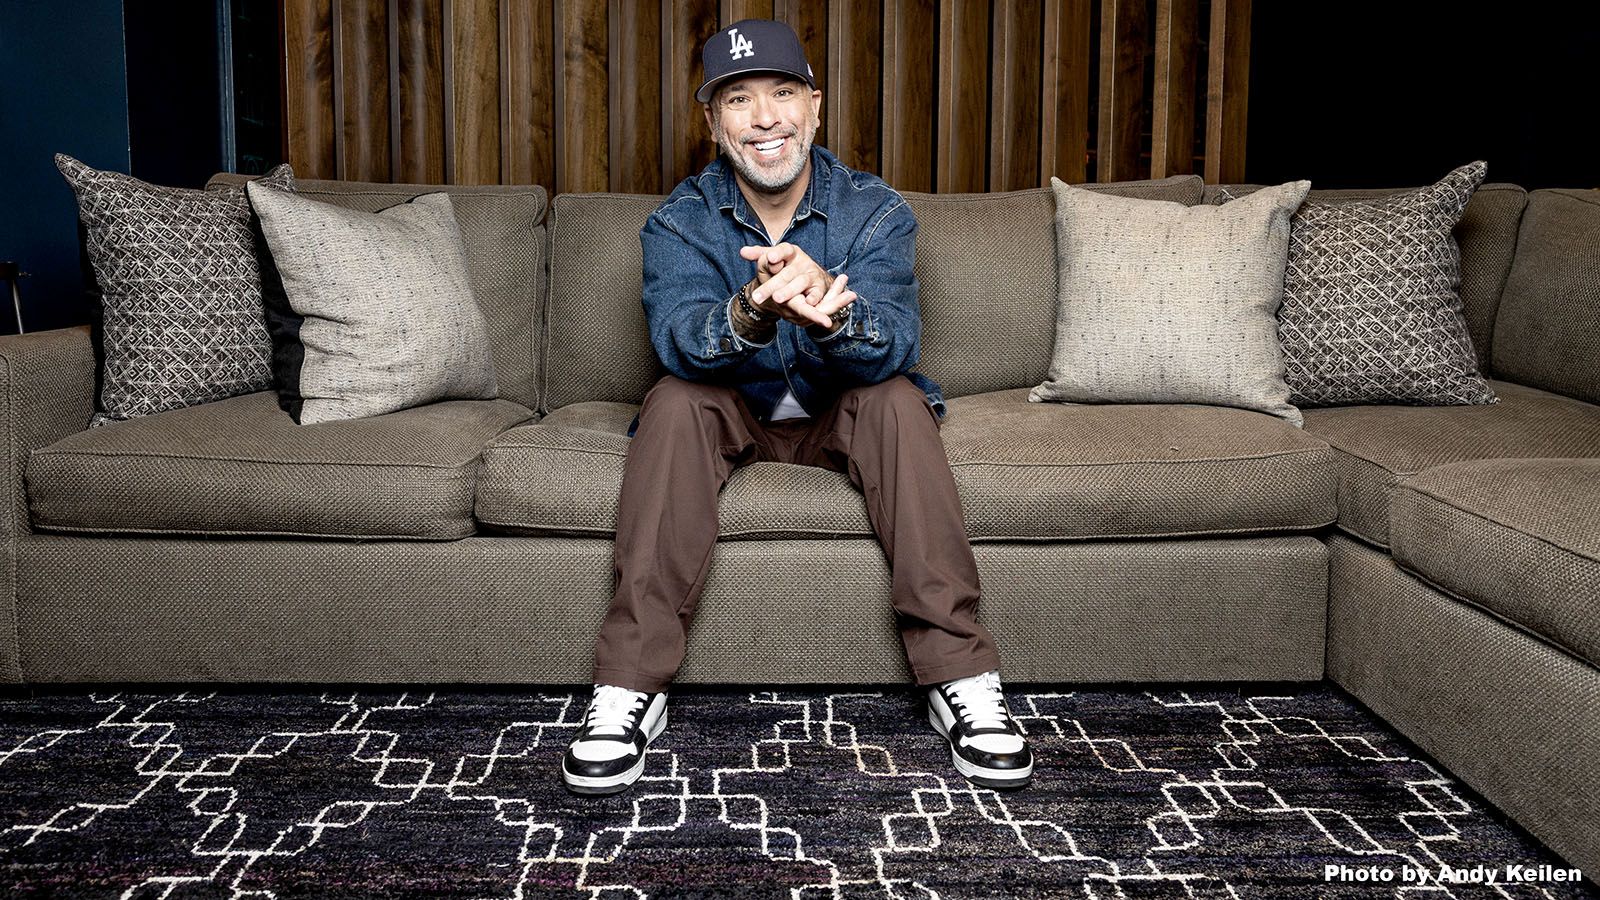 Comedian Jo Koy will perform his stand-up routine at Embassy Theatre on Sunday, Feb. 4.